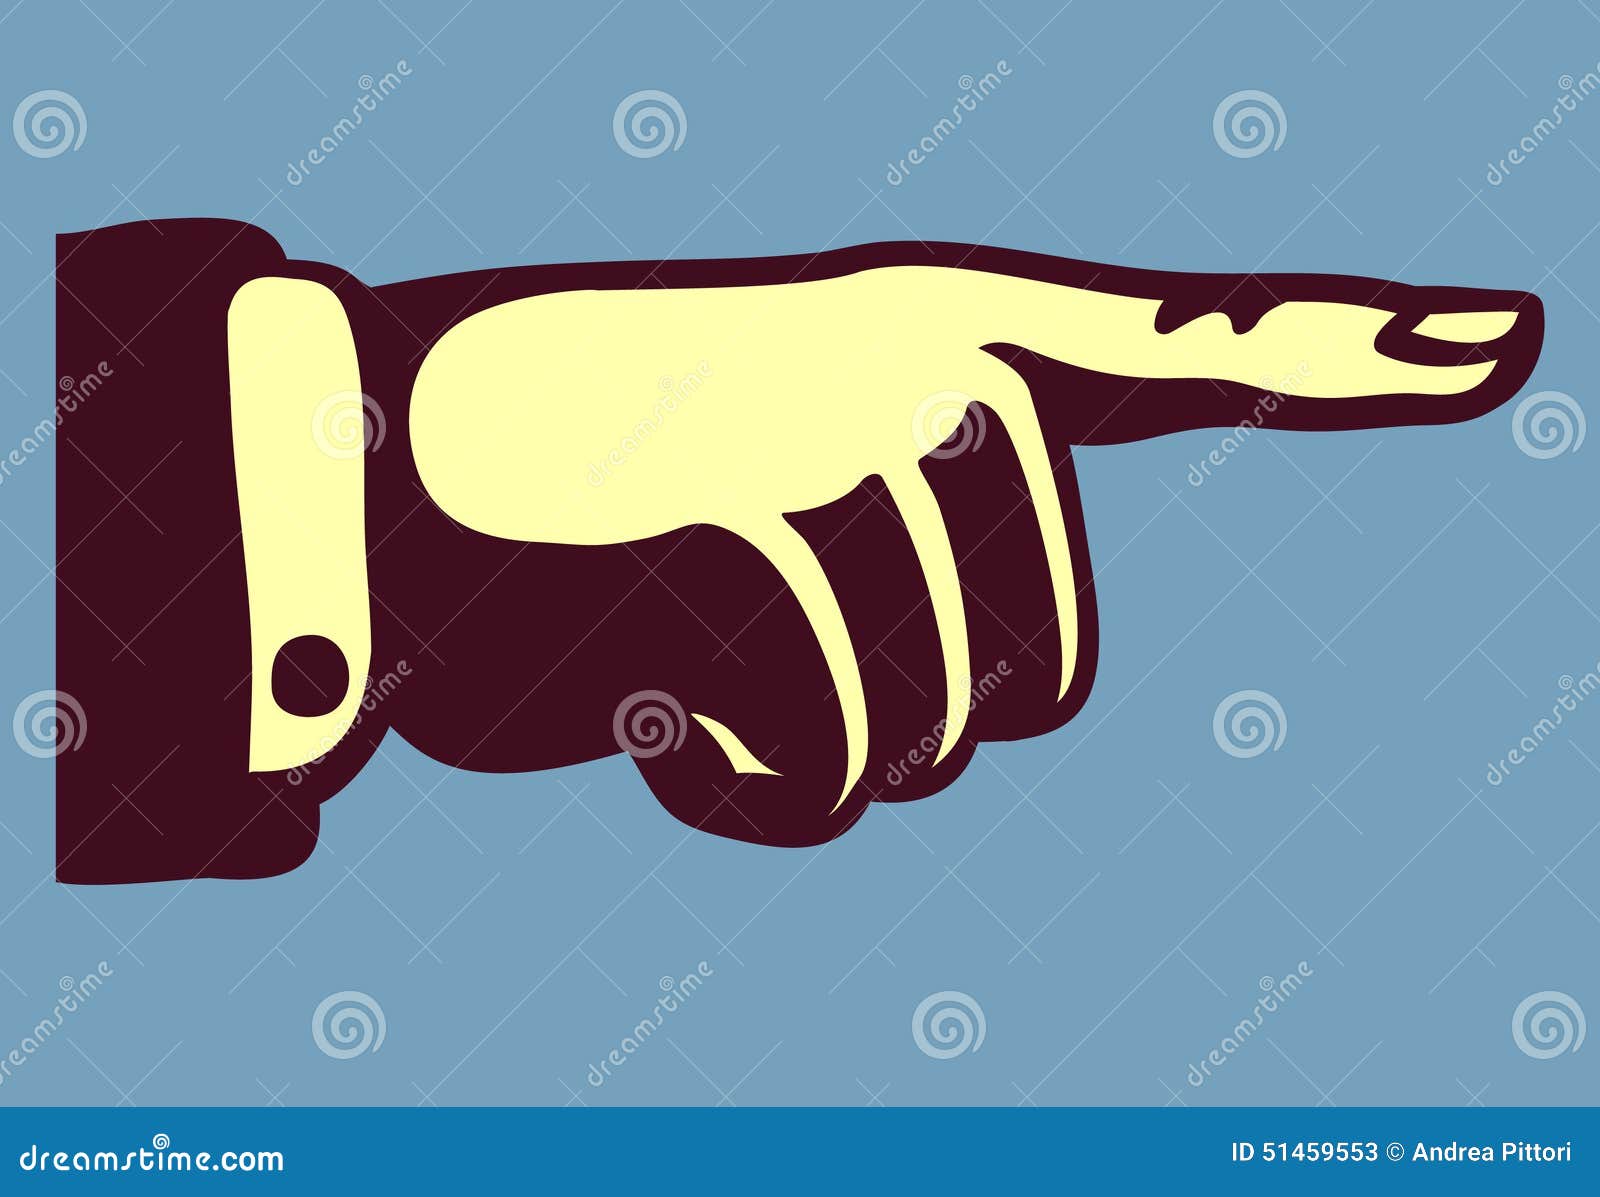 vintage hand with pointing finger